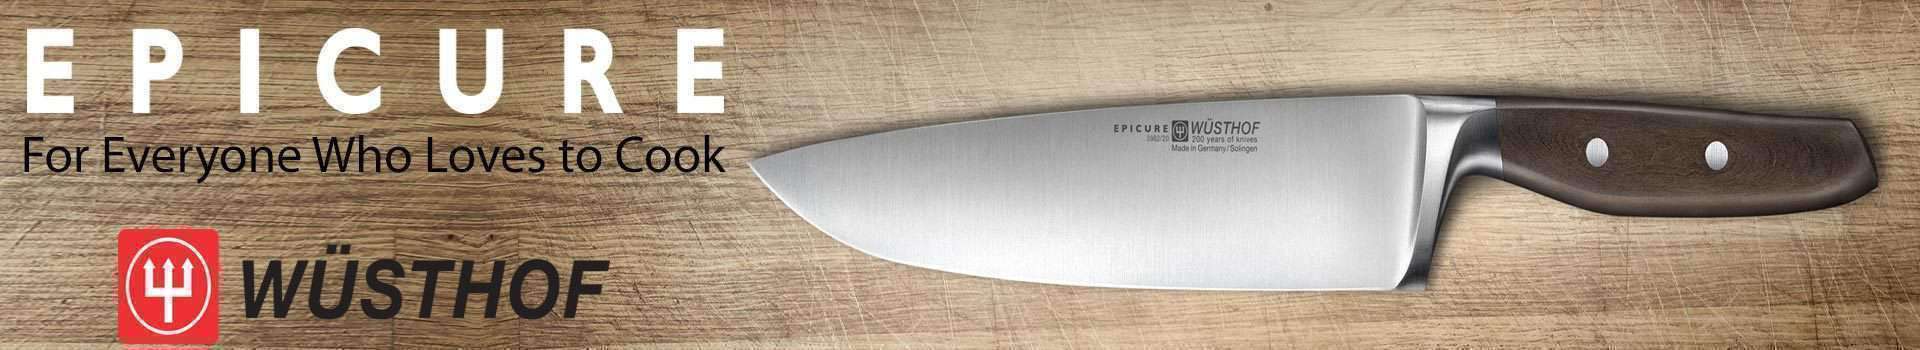 Wusthof Epicure Knives